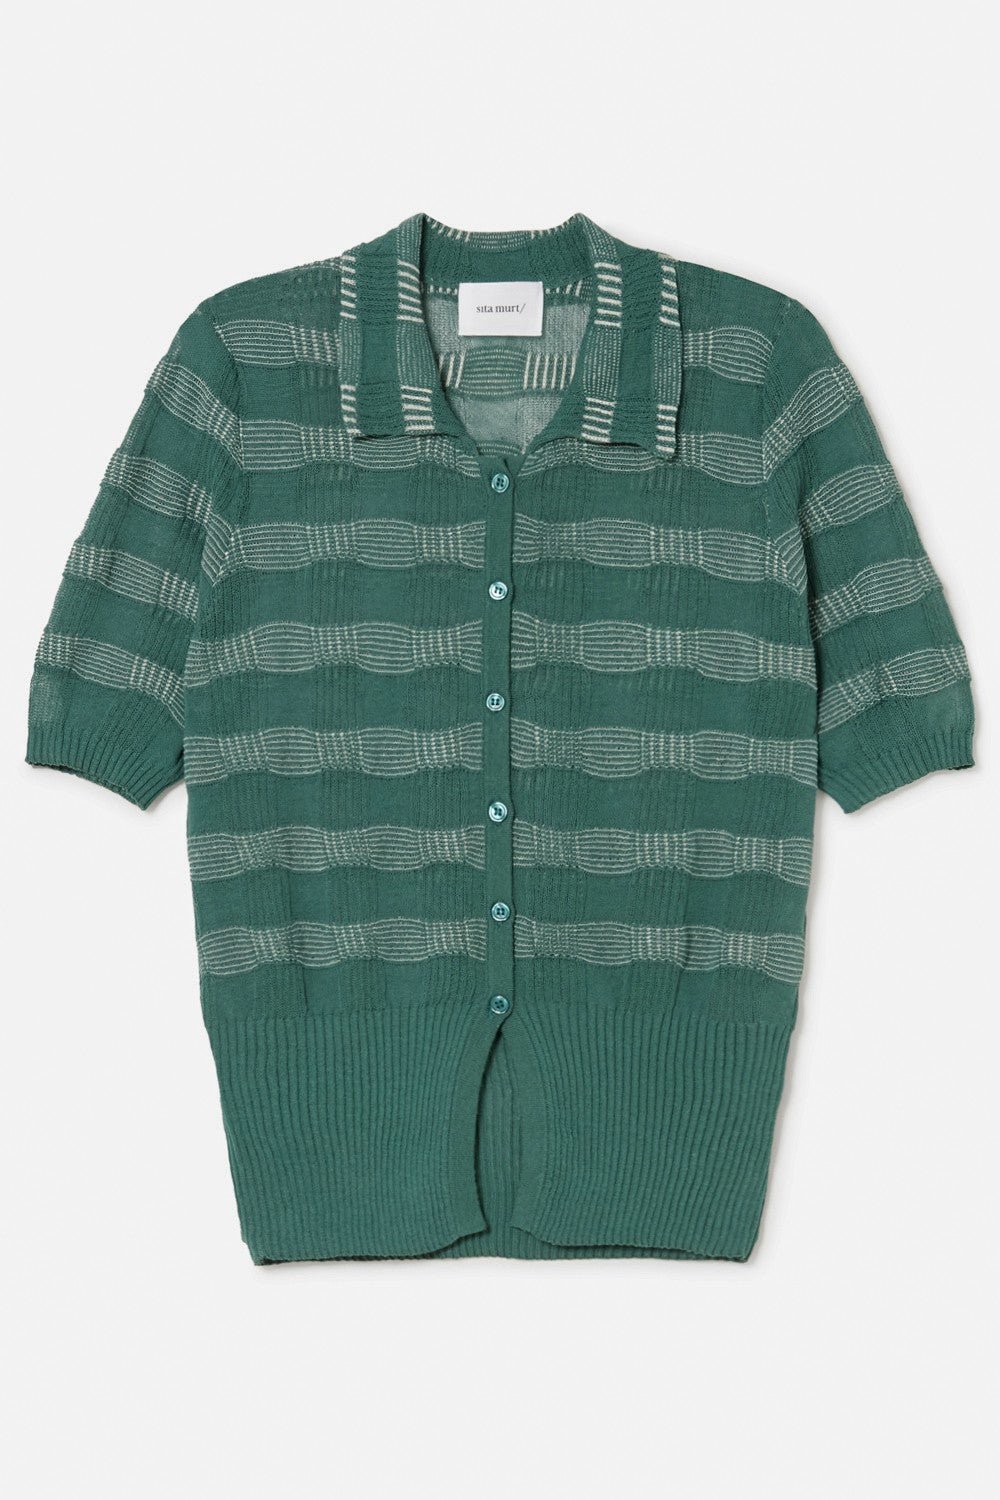 Sita Murt - Knitted Check Shirt: Green - Shorely Chic Boutique